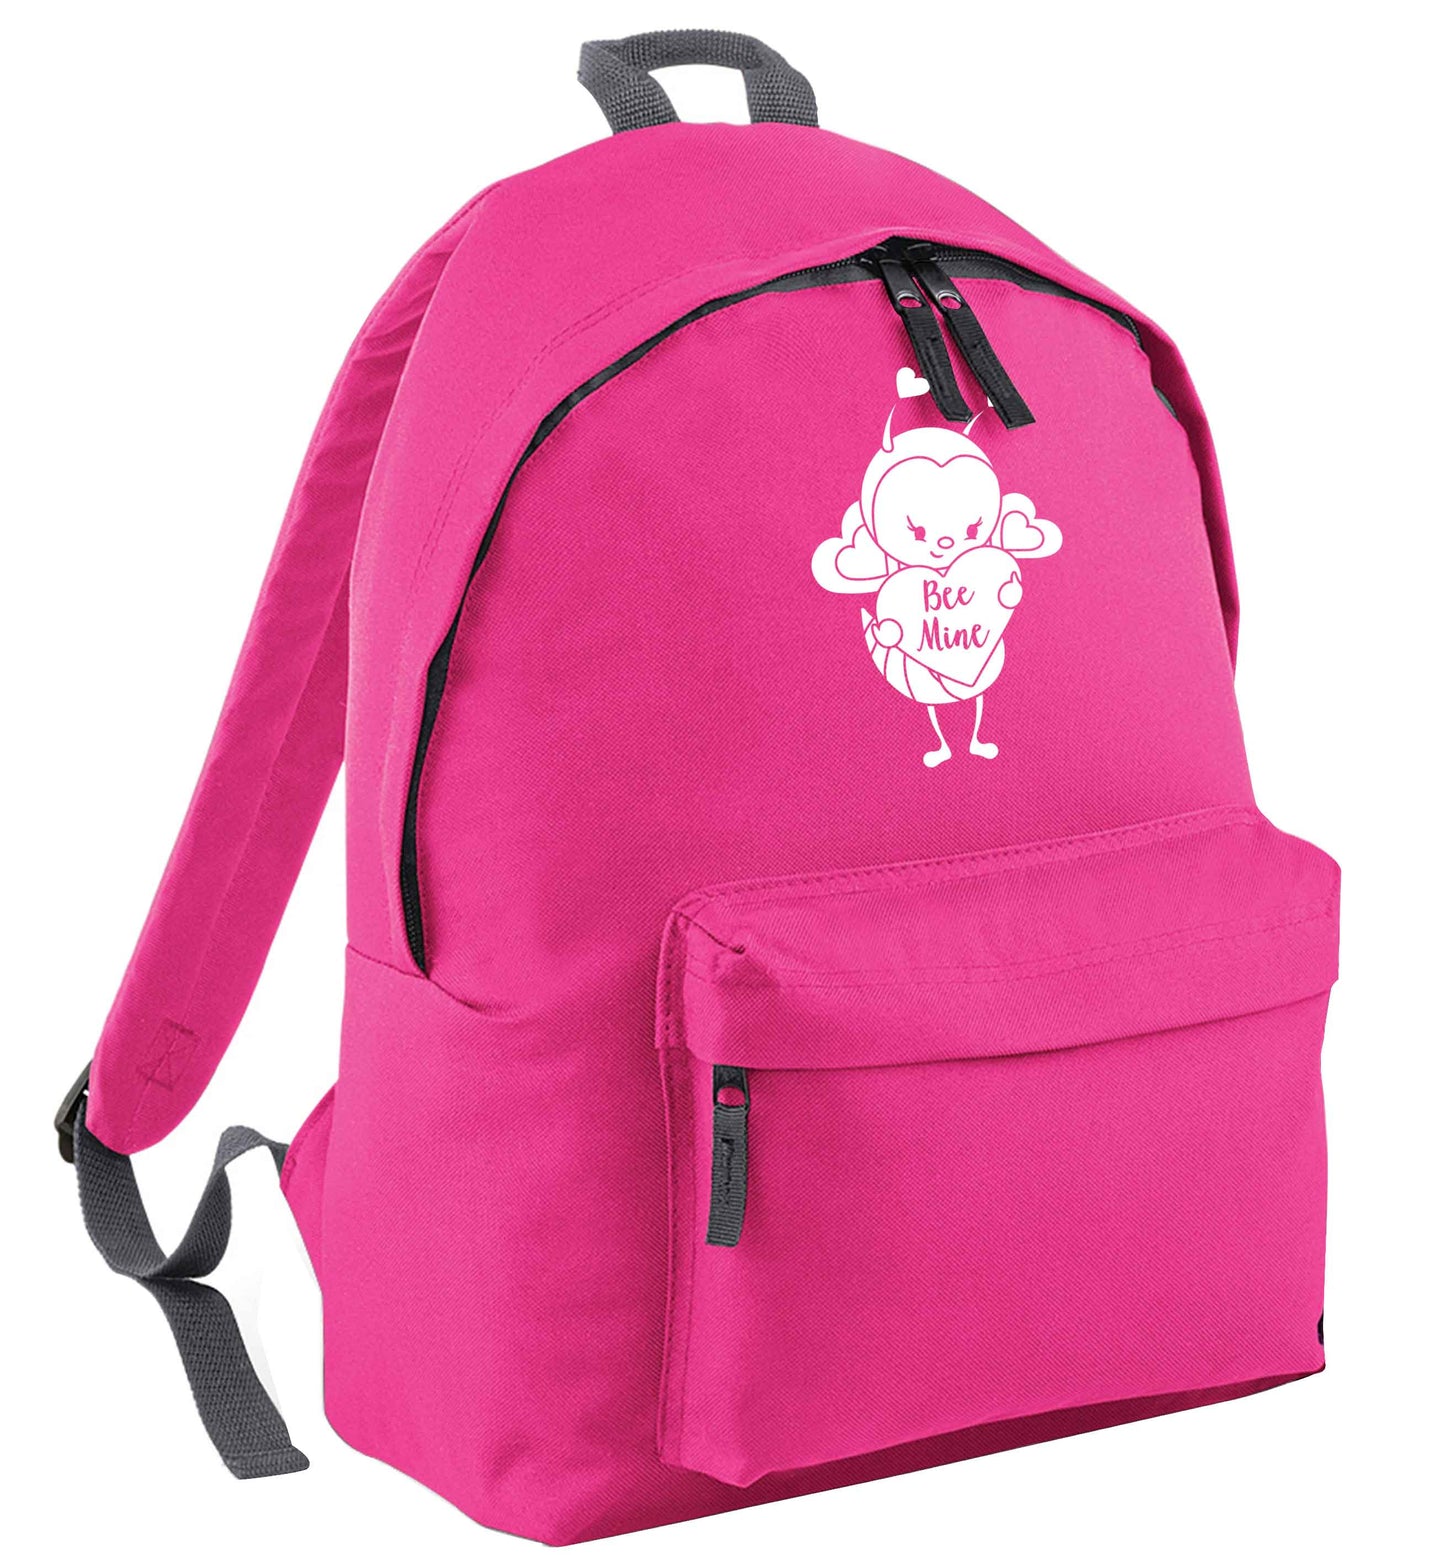 Bee mine pink adults backpack